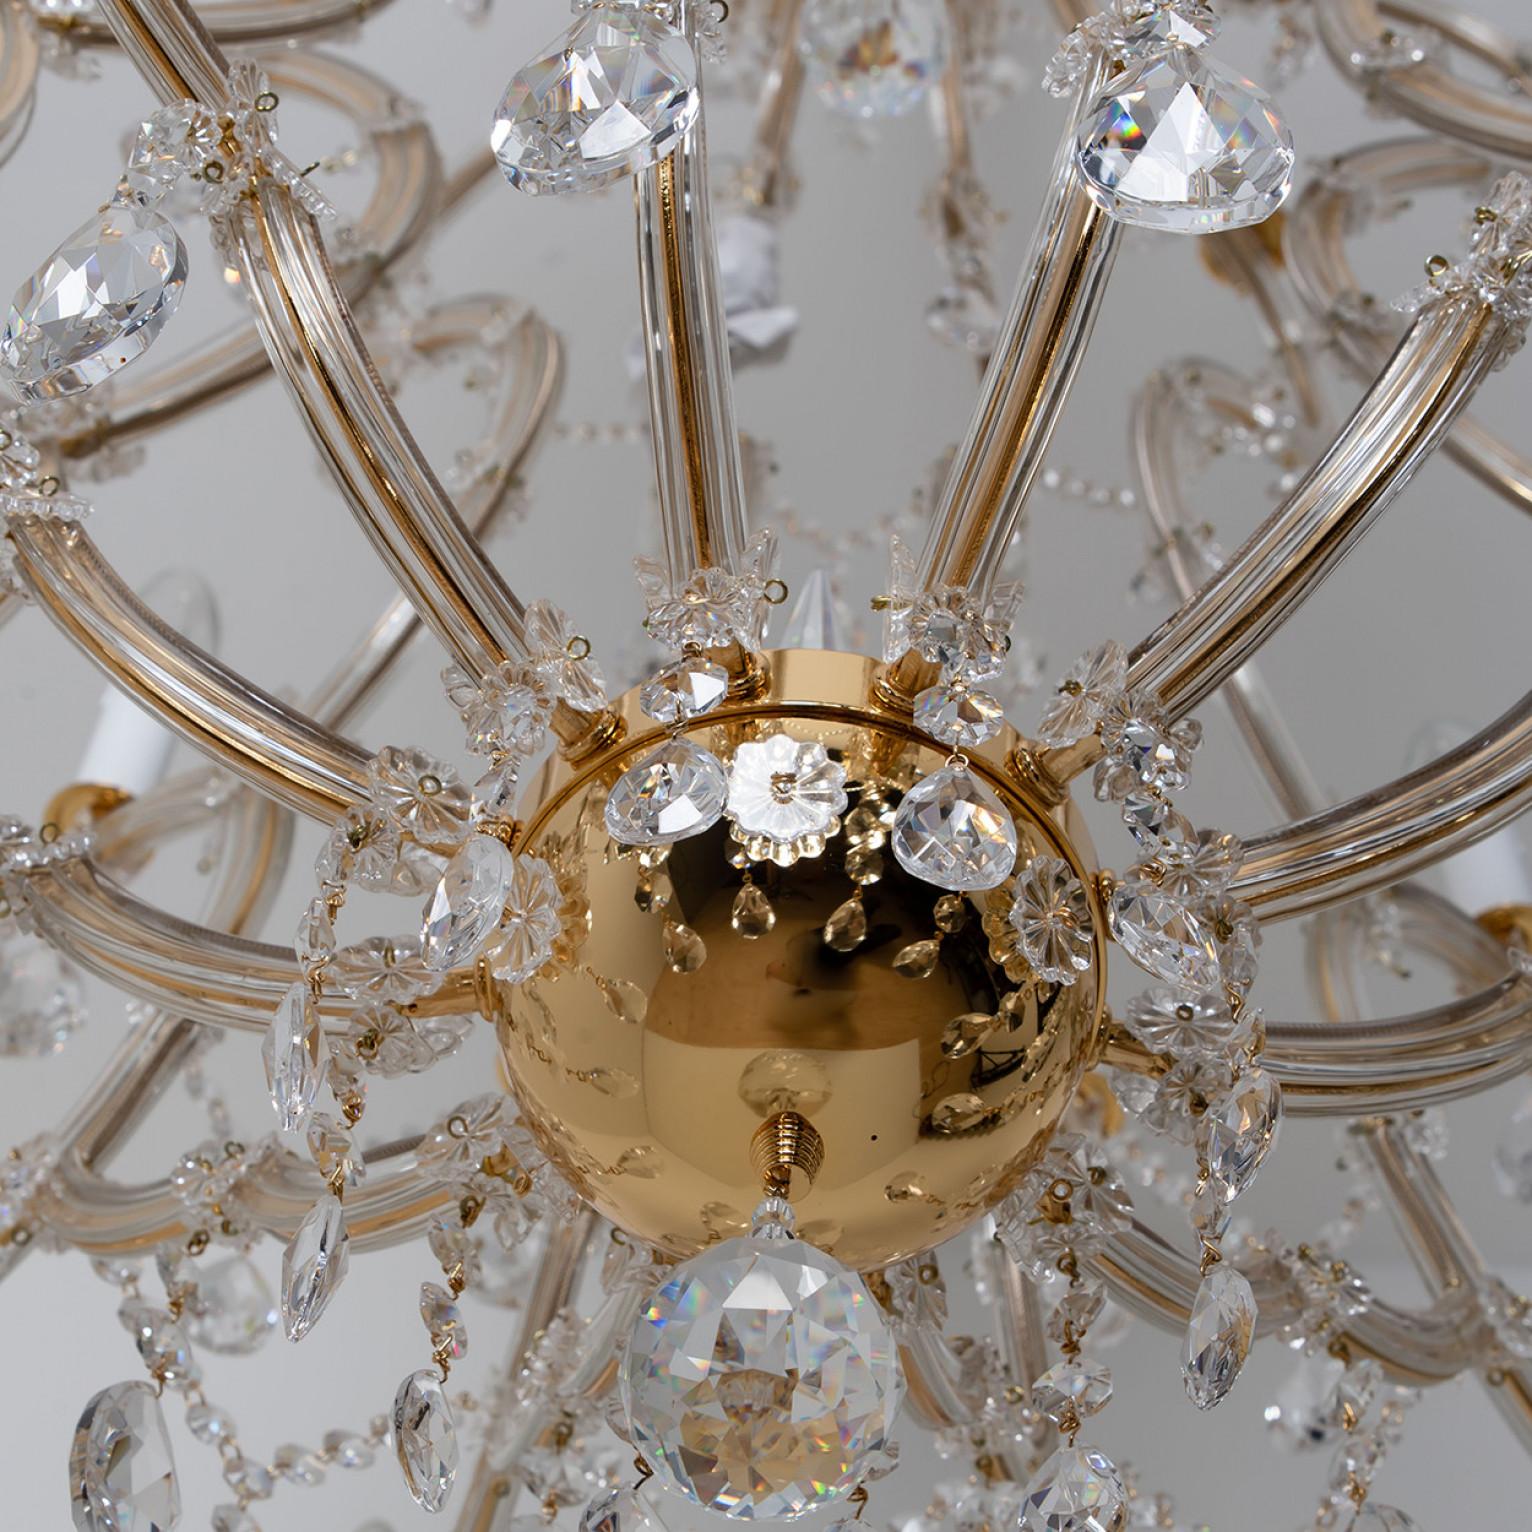 20th Century High-End XL Maria Theresa Gold Plated Swarovski Chandelier For Sale